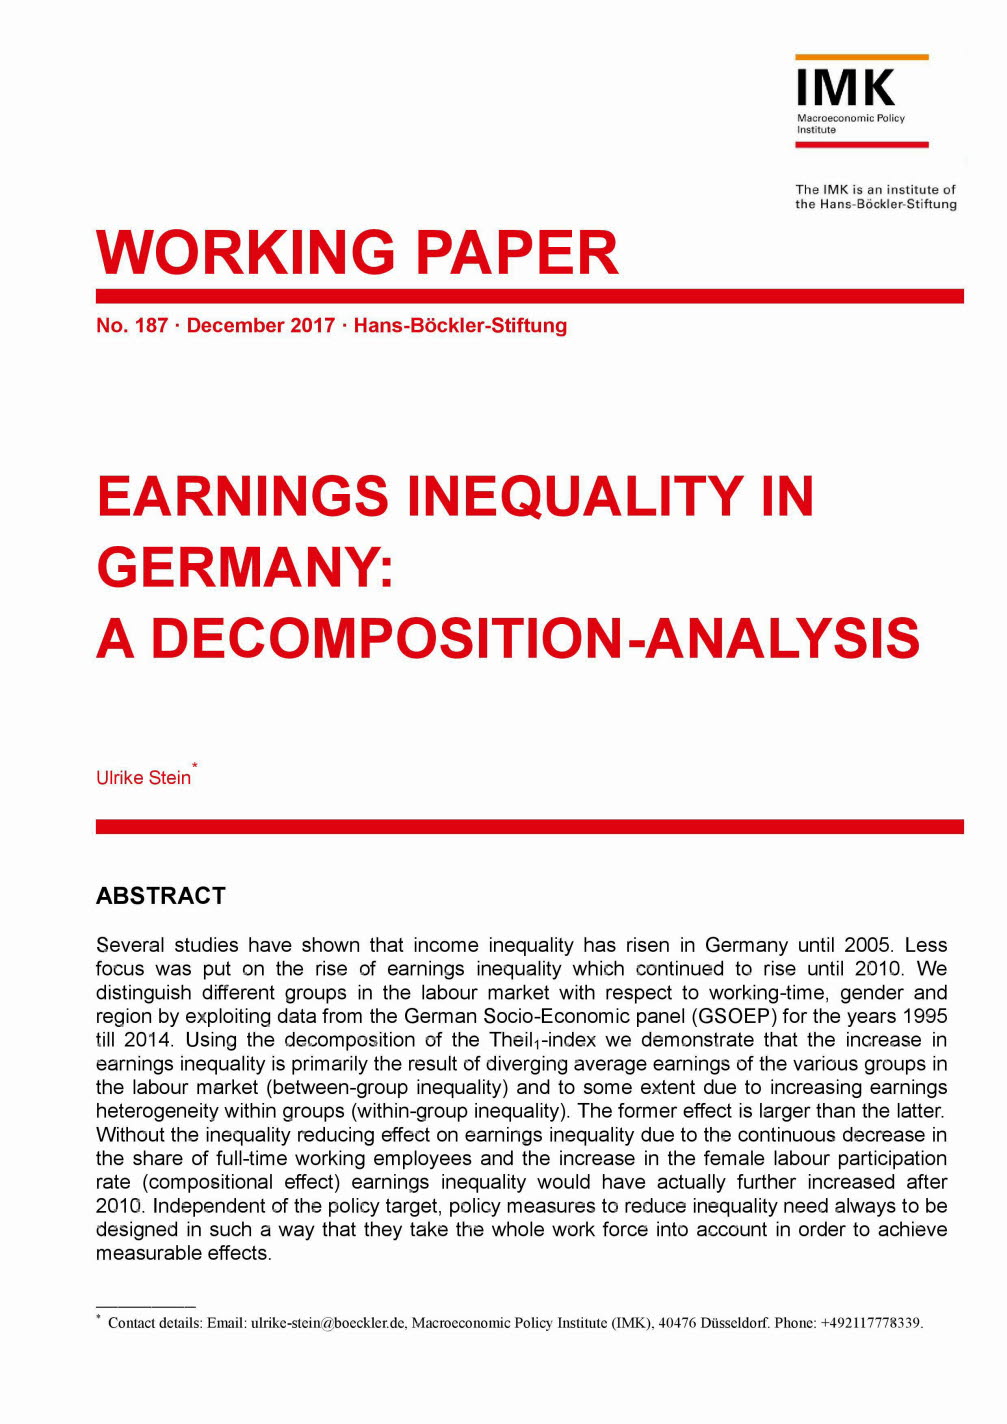 Earnings inequality in Germany